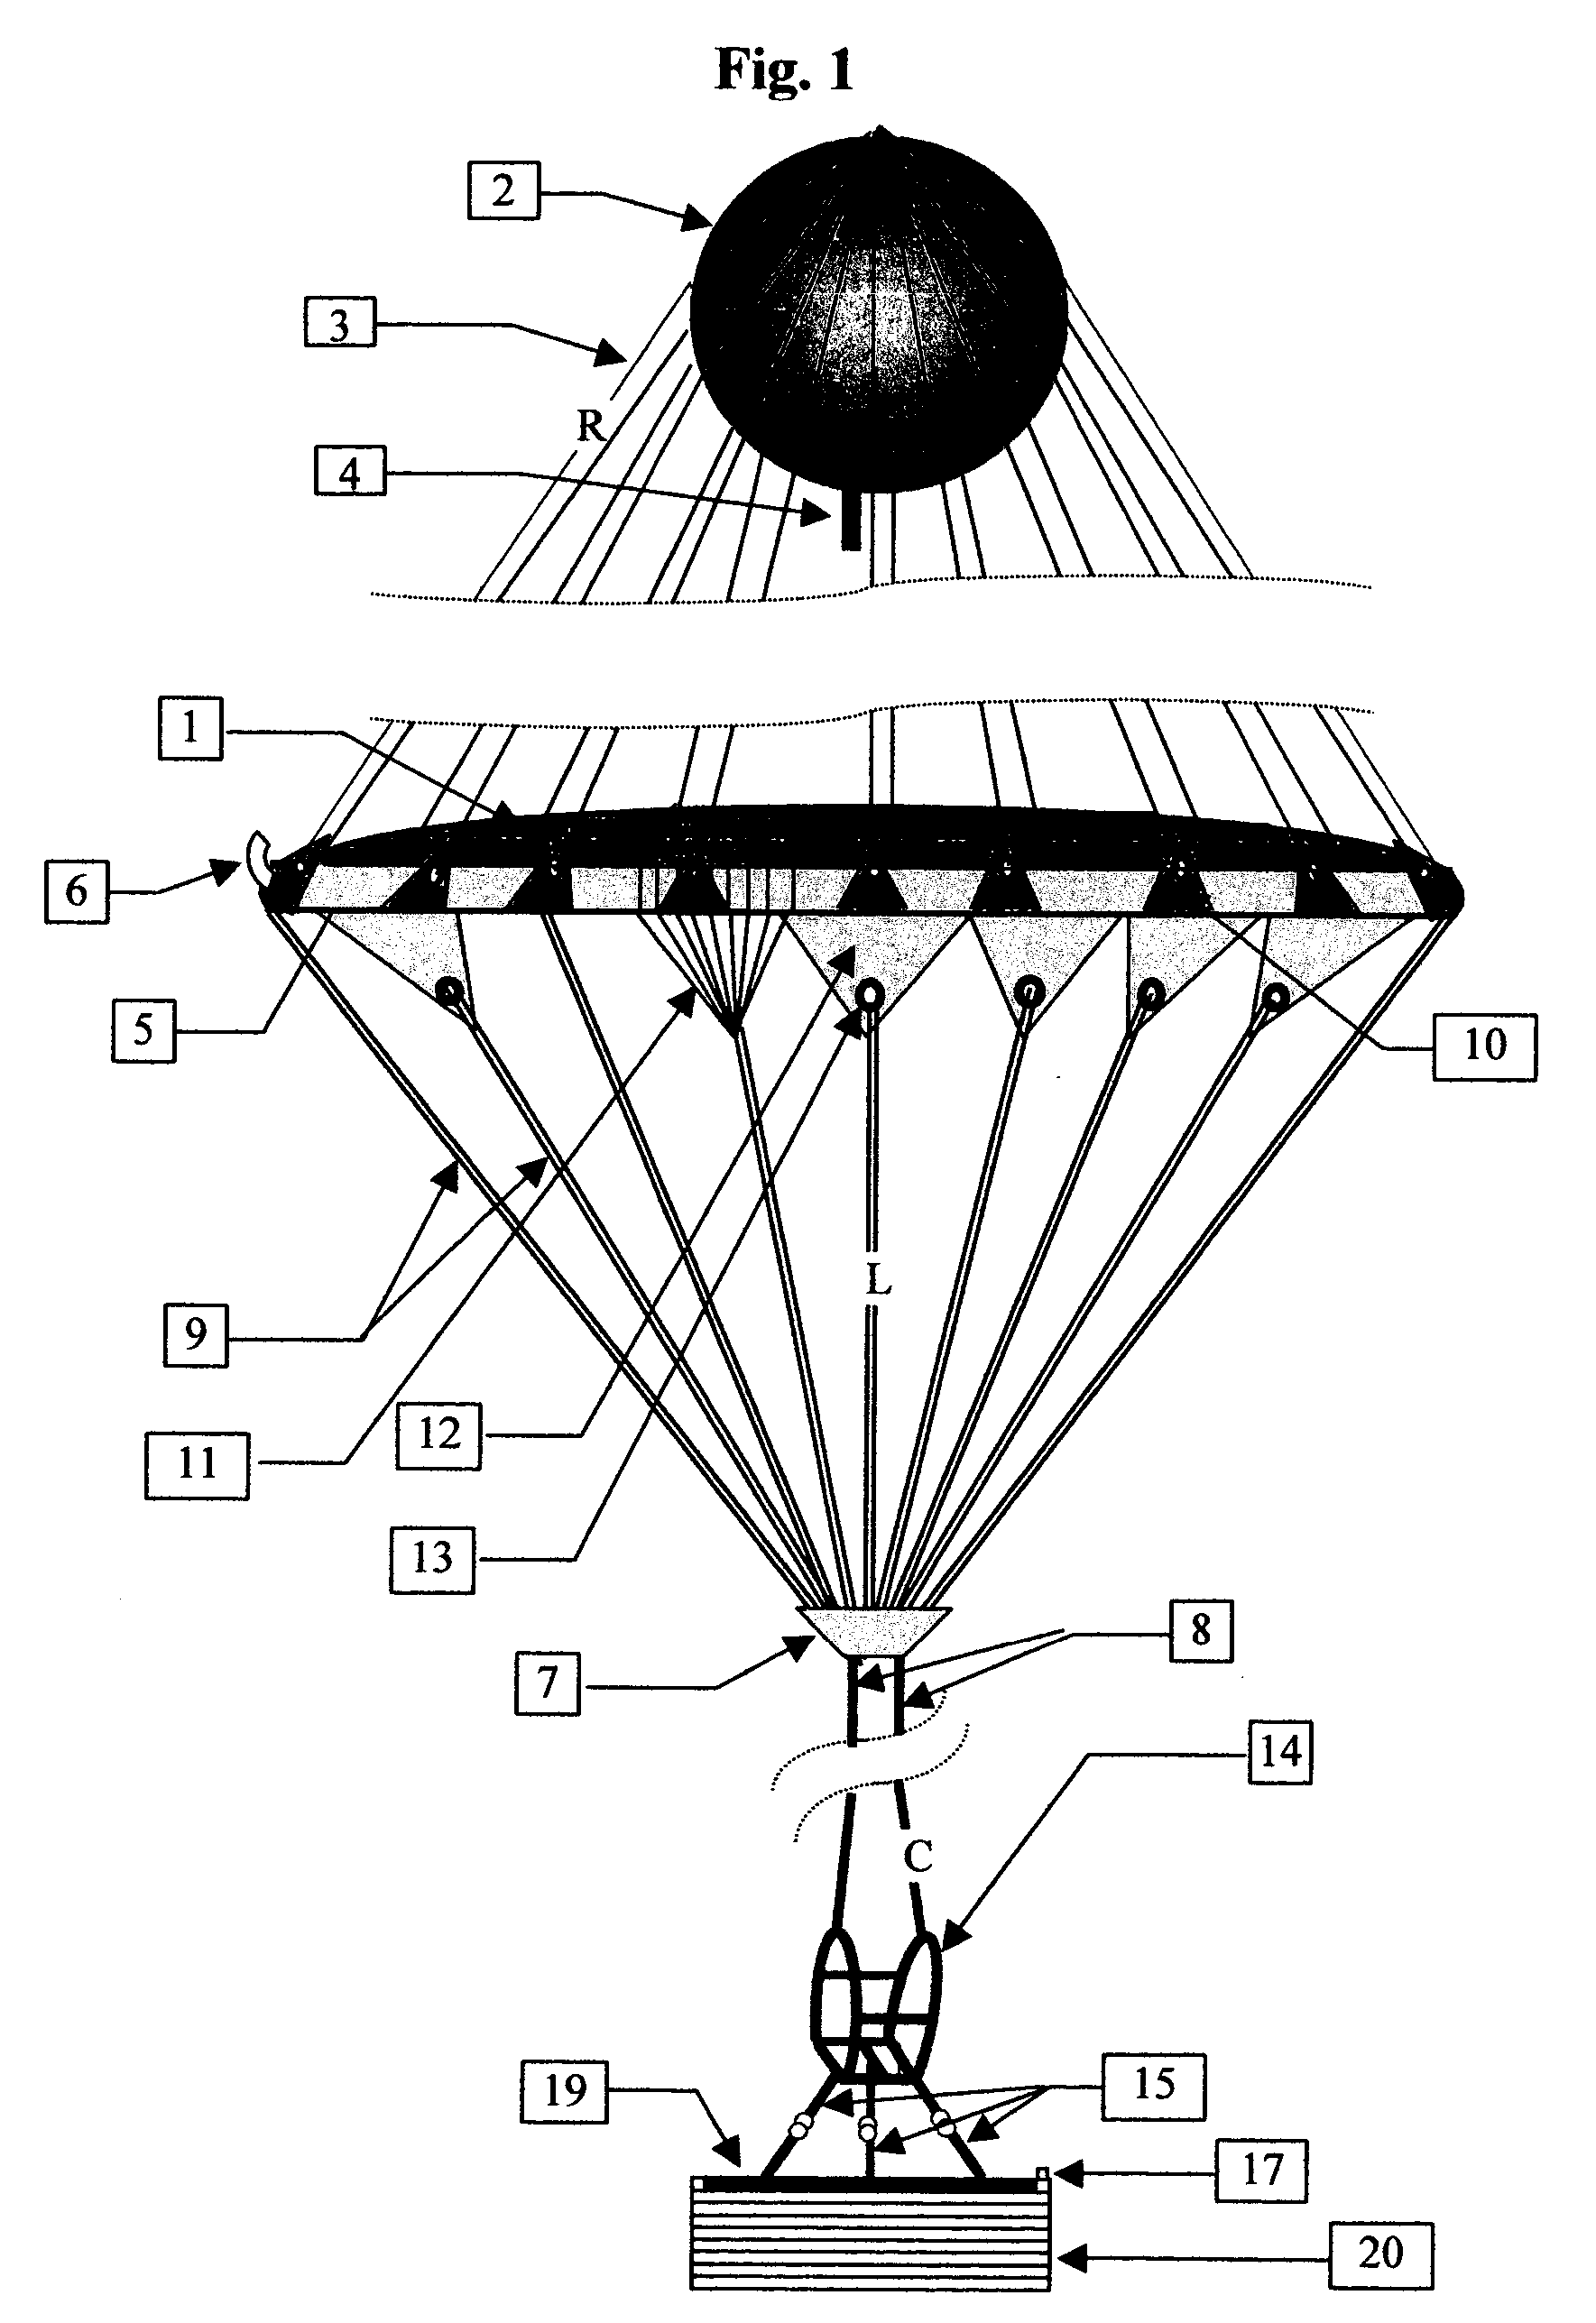 Inflatable parachute for very low altitude jumping and method for delivering same to a person in need